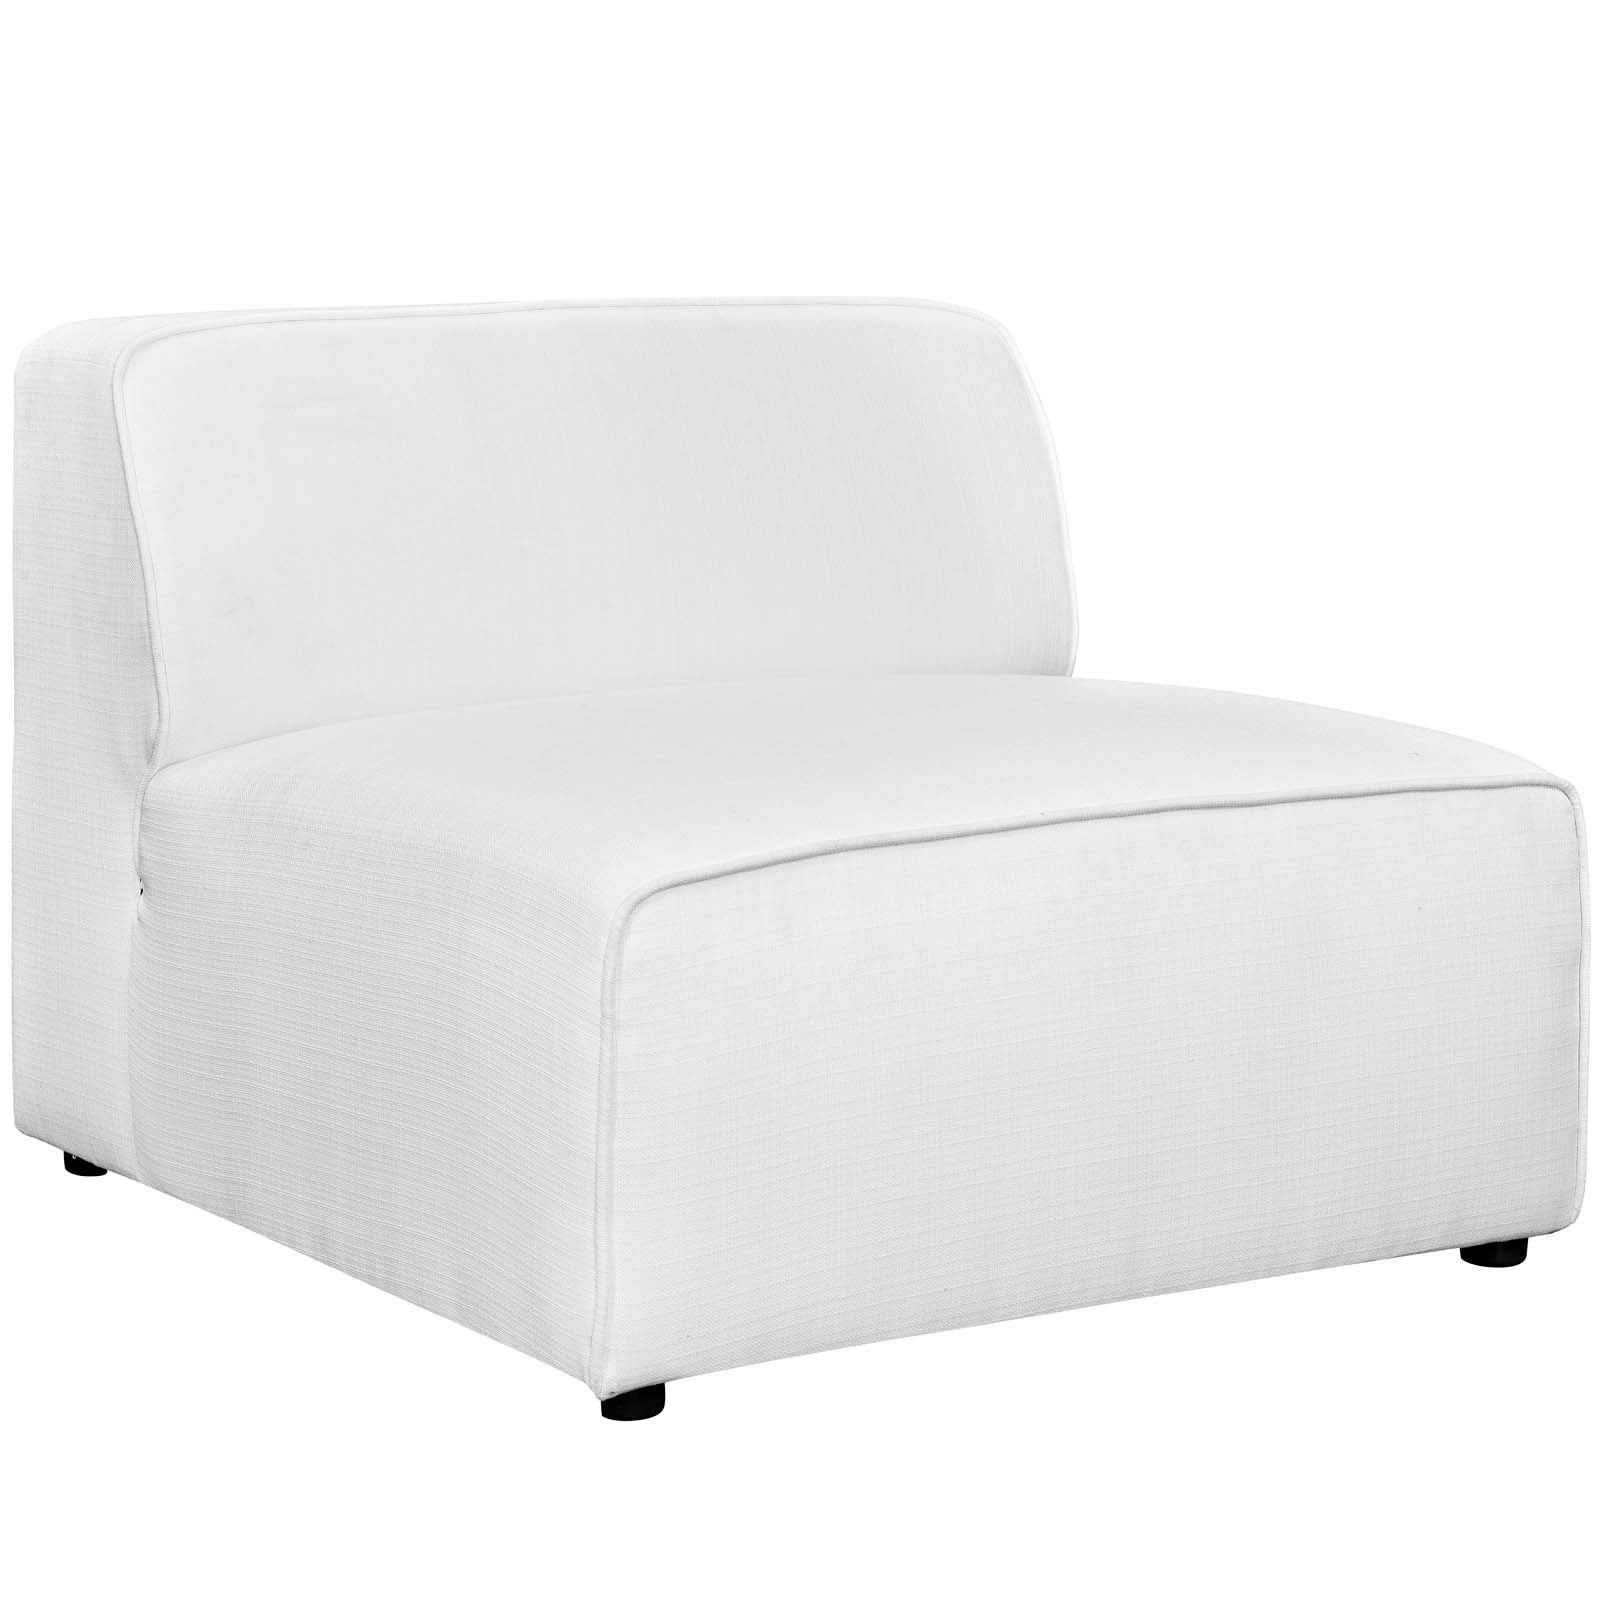 Modway Sectional Sofas - Mingle 5 Piece Upholstered Fabric Sectional Sofa Set White 115"